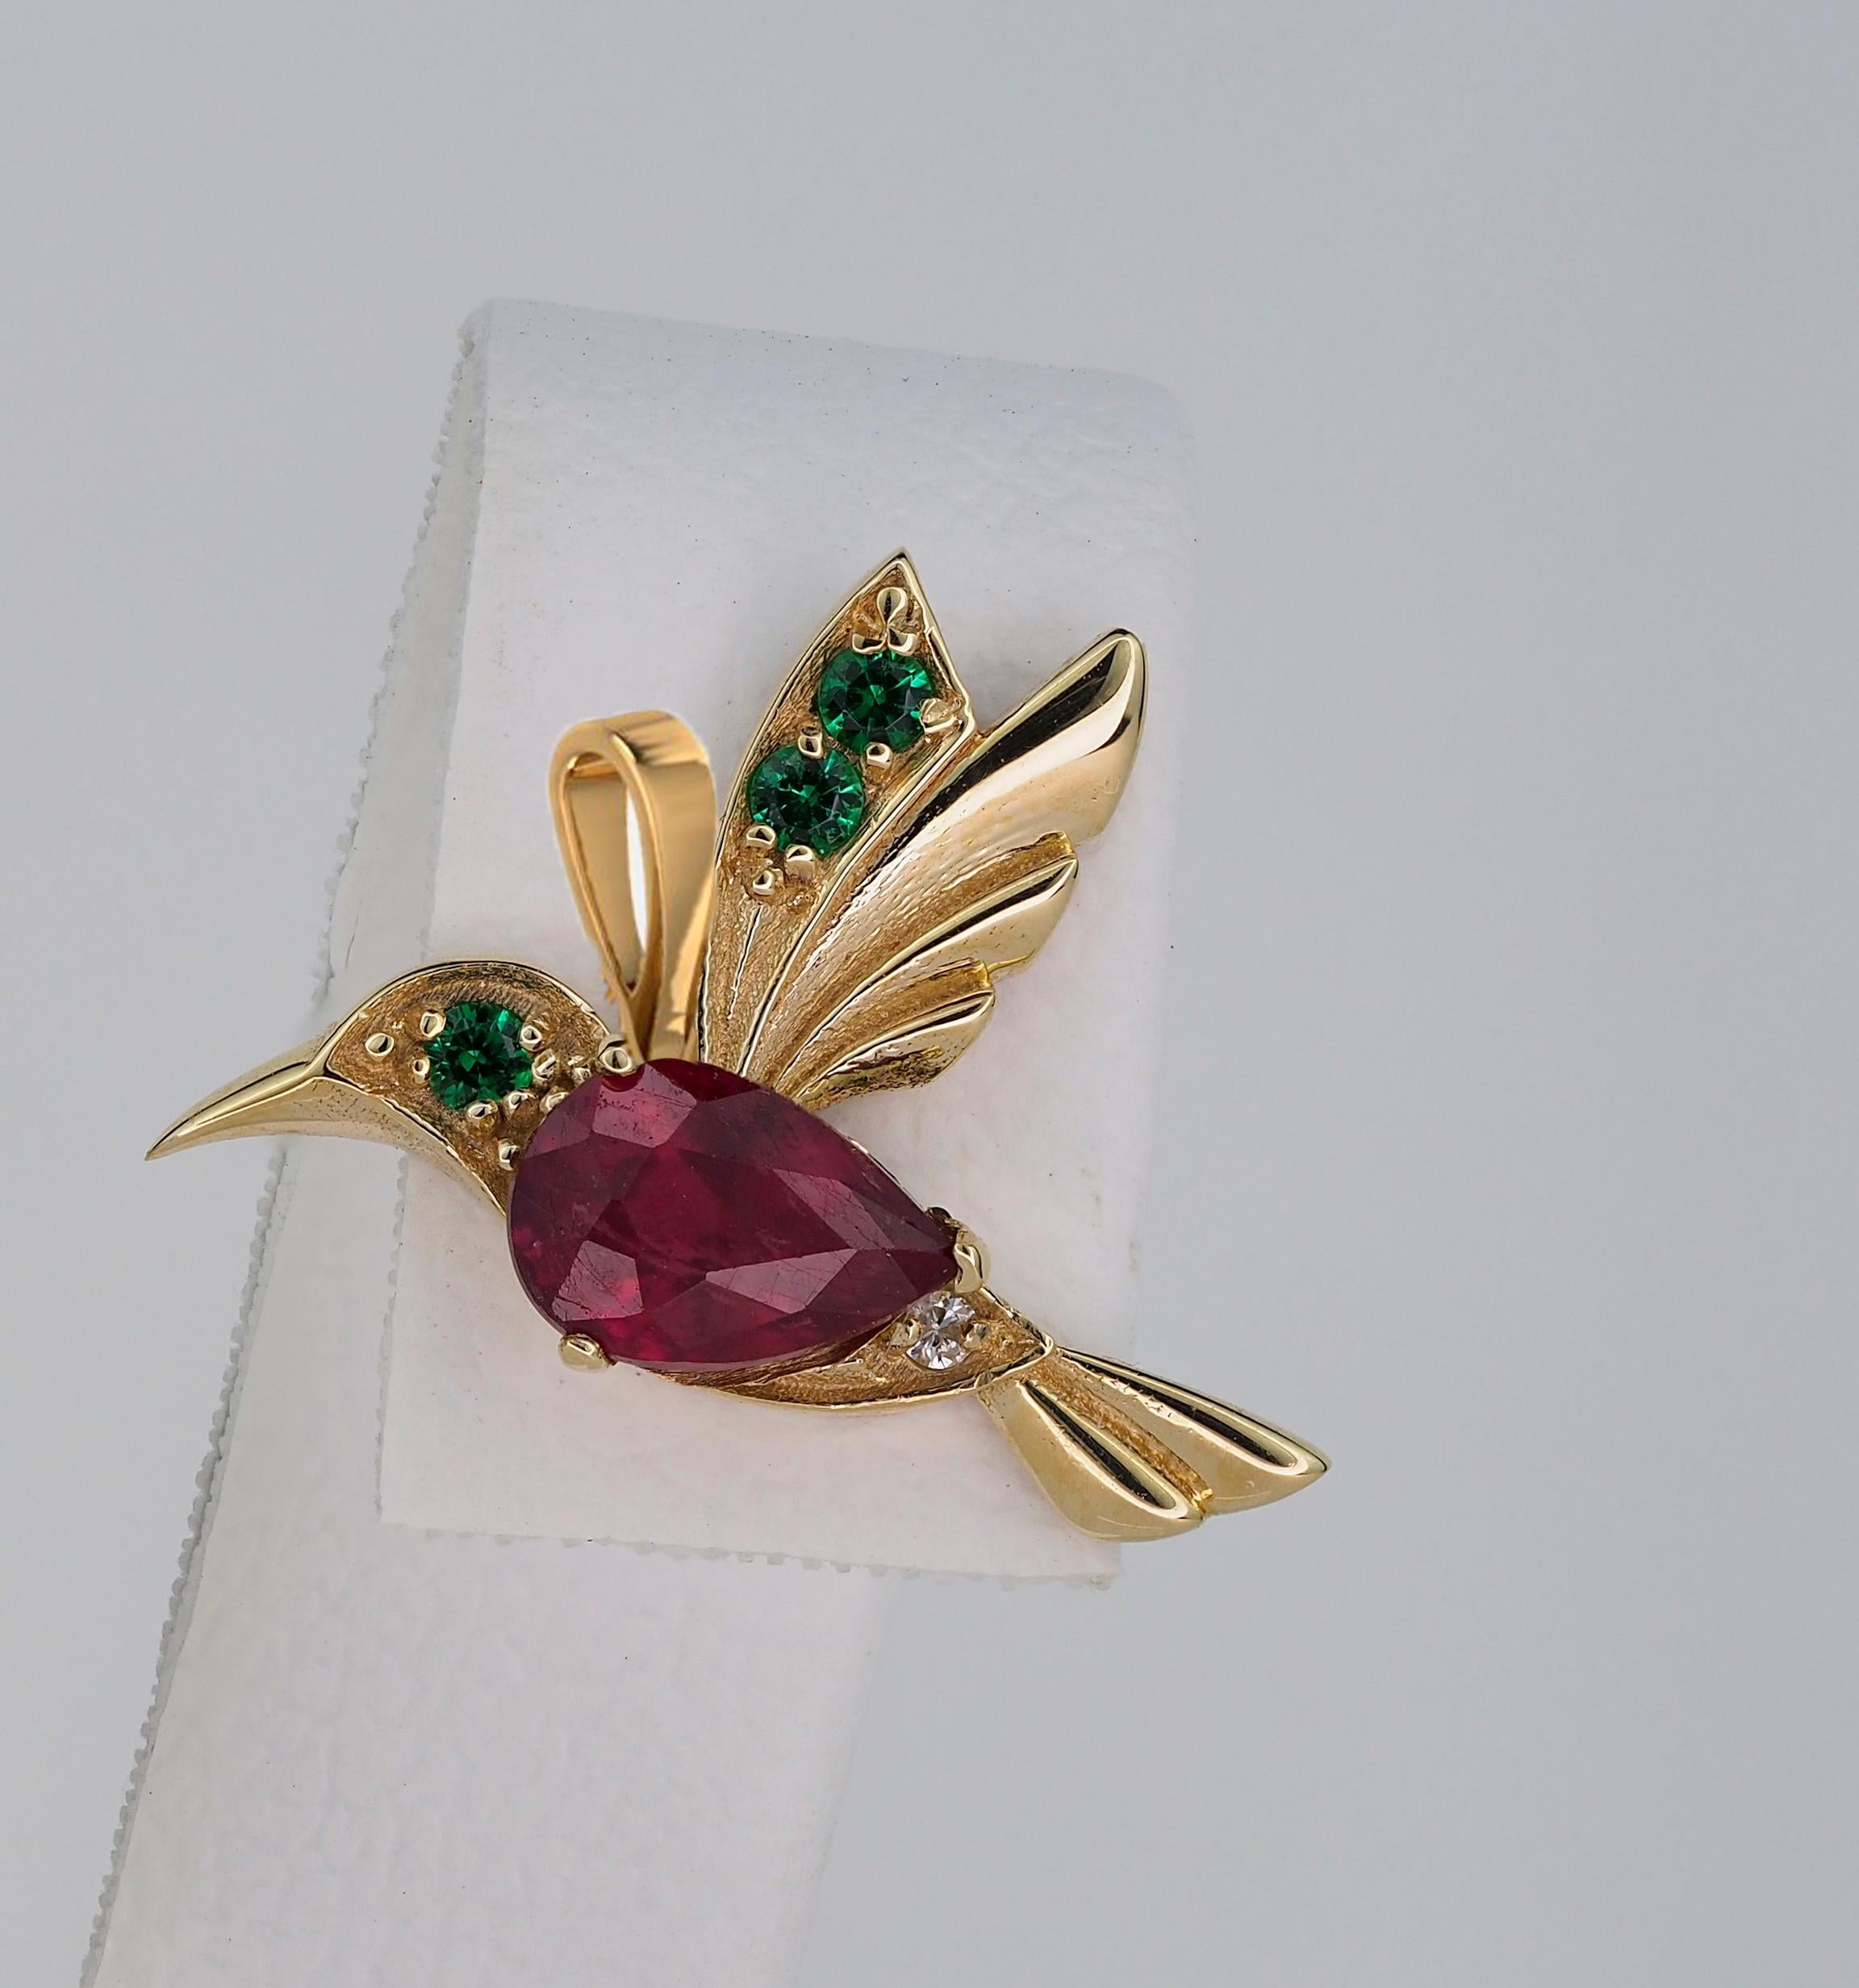 Pear Cut 14k Gold Hummingbird Pendant with Rubies, Bird Pendant with Colored Gemstones